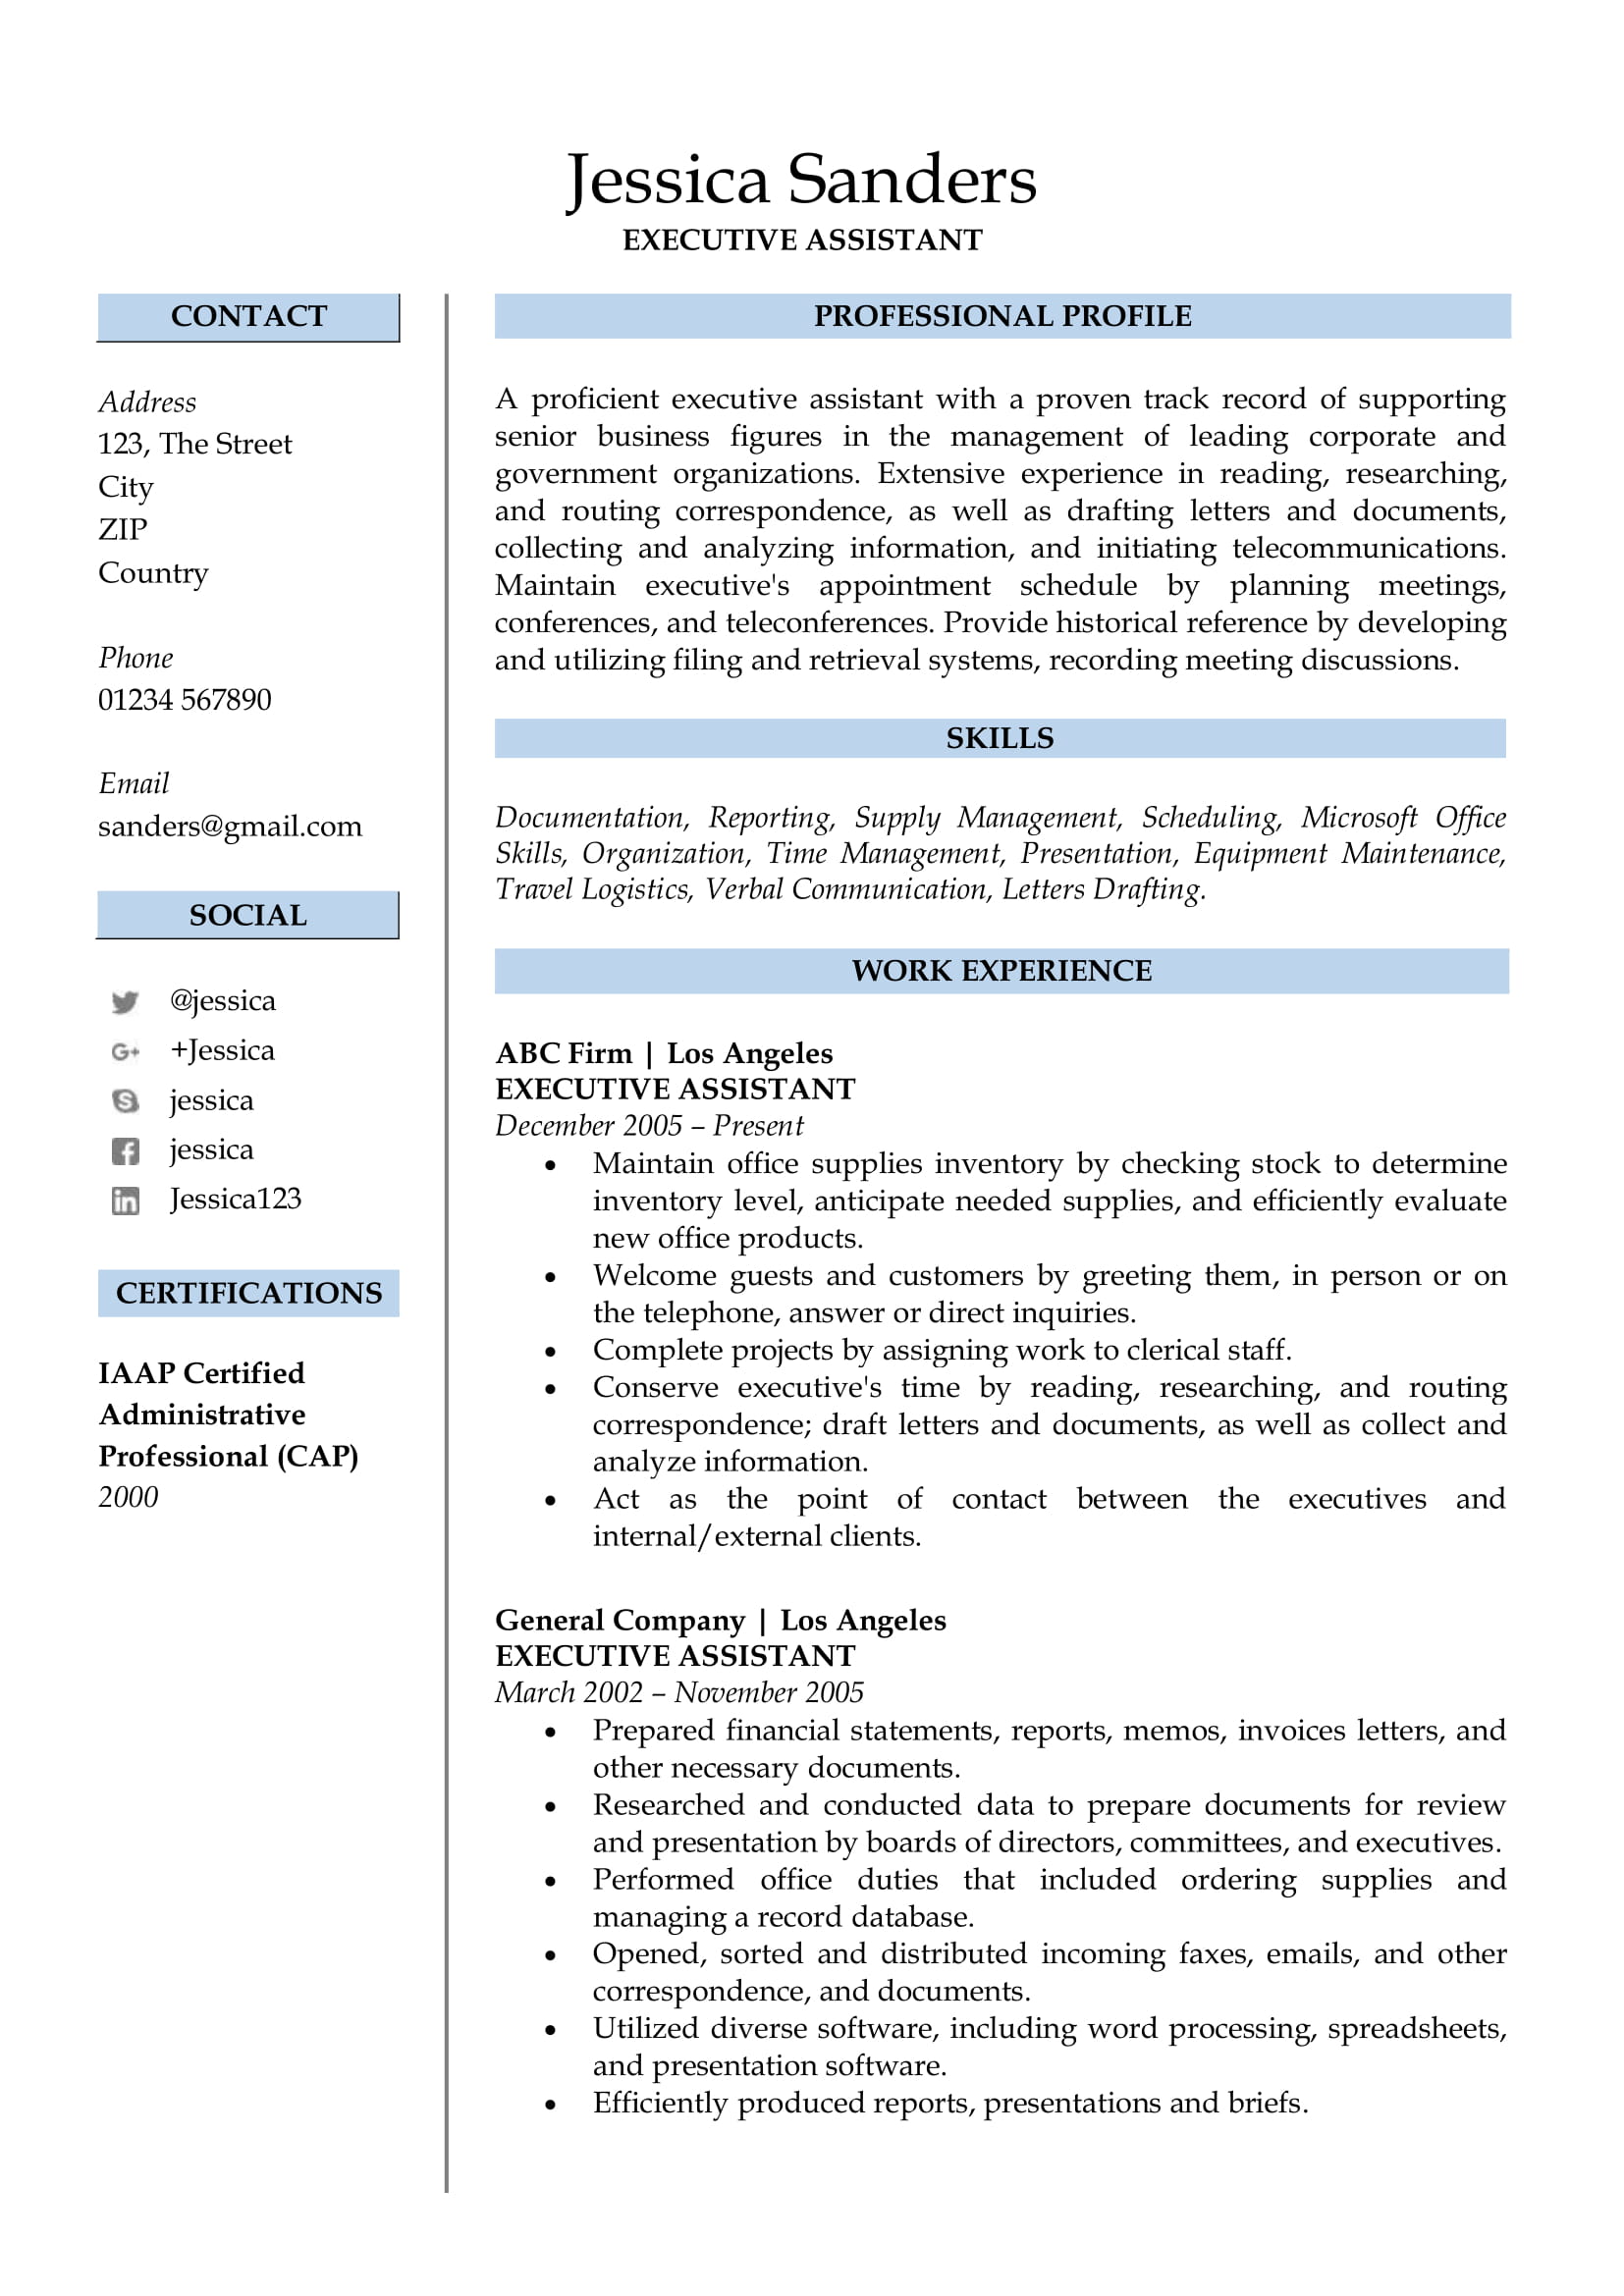 How to create a professional job resume